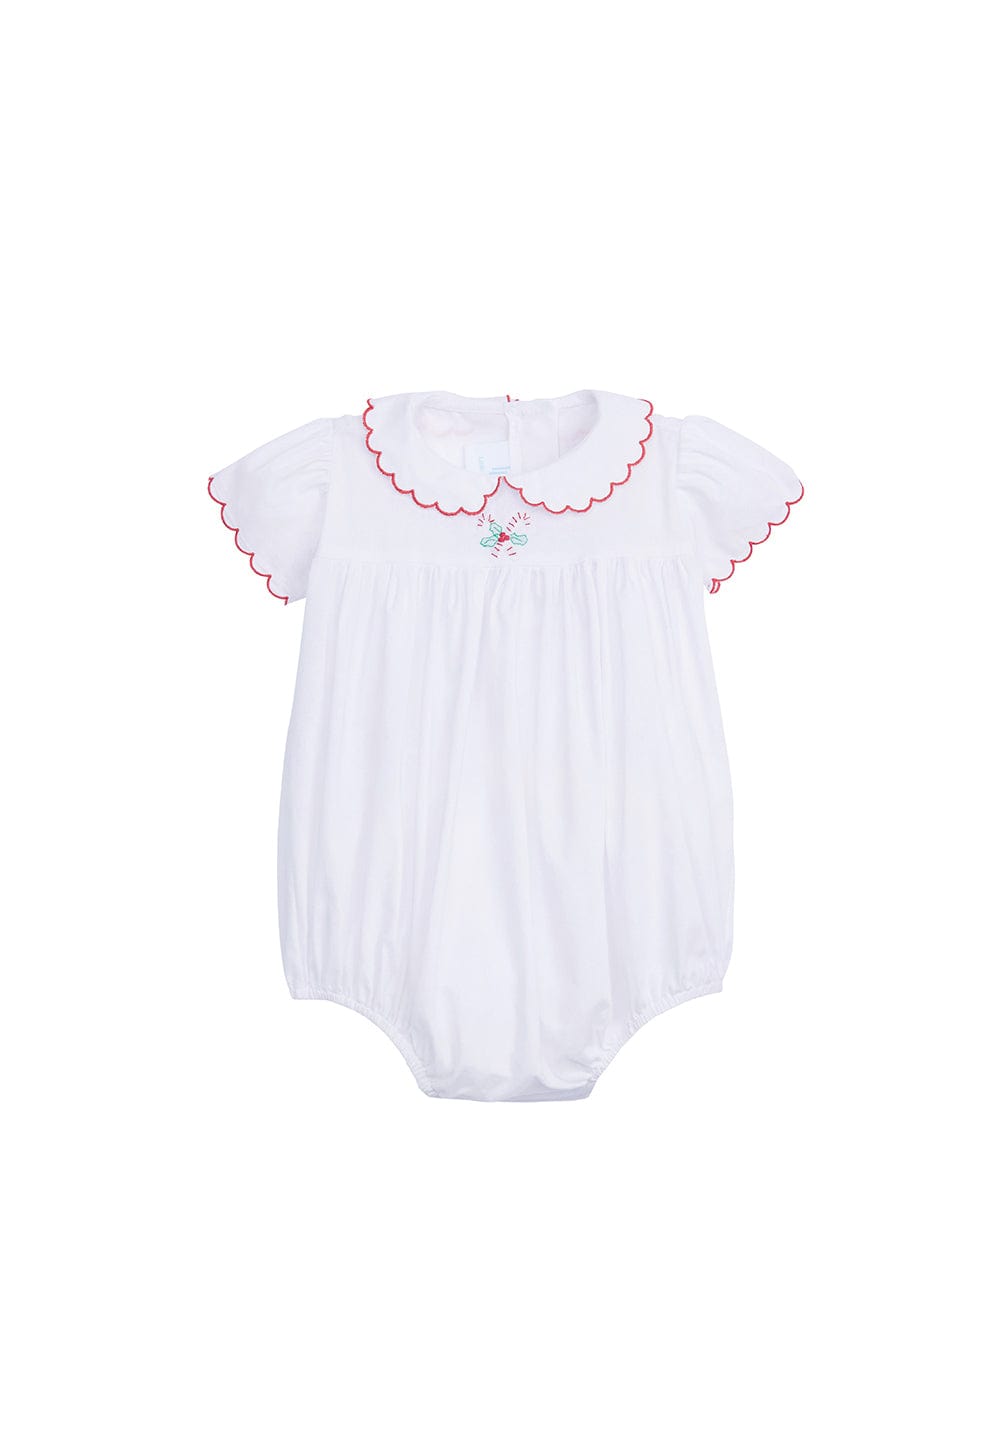 seguridadindustrialcr baby girl's holiday bubble with candy cane embroidery